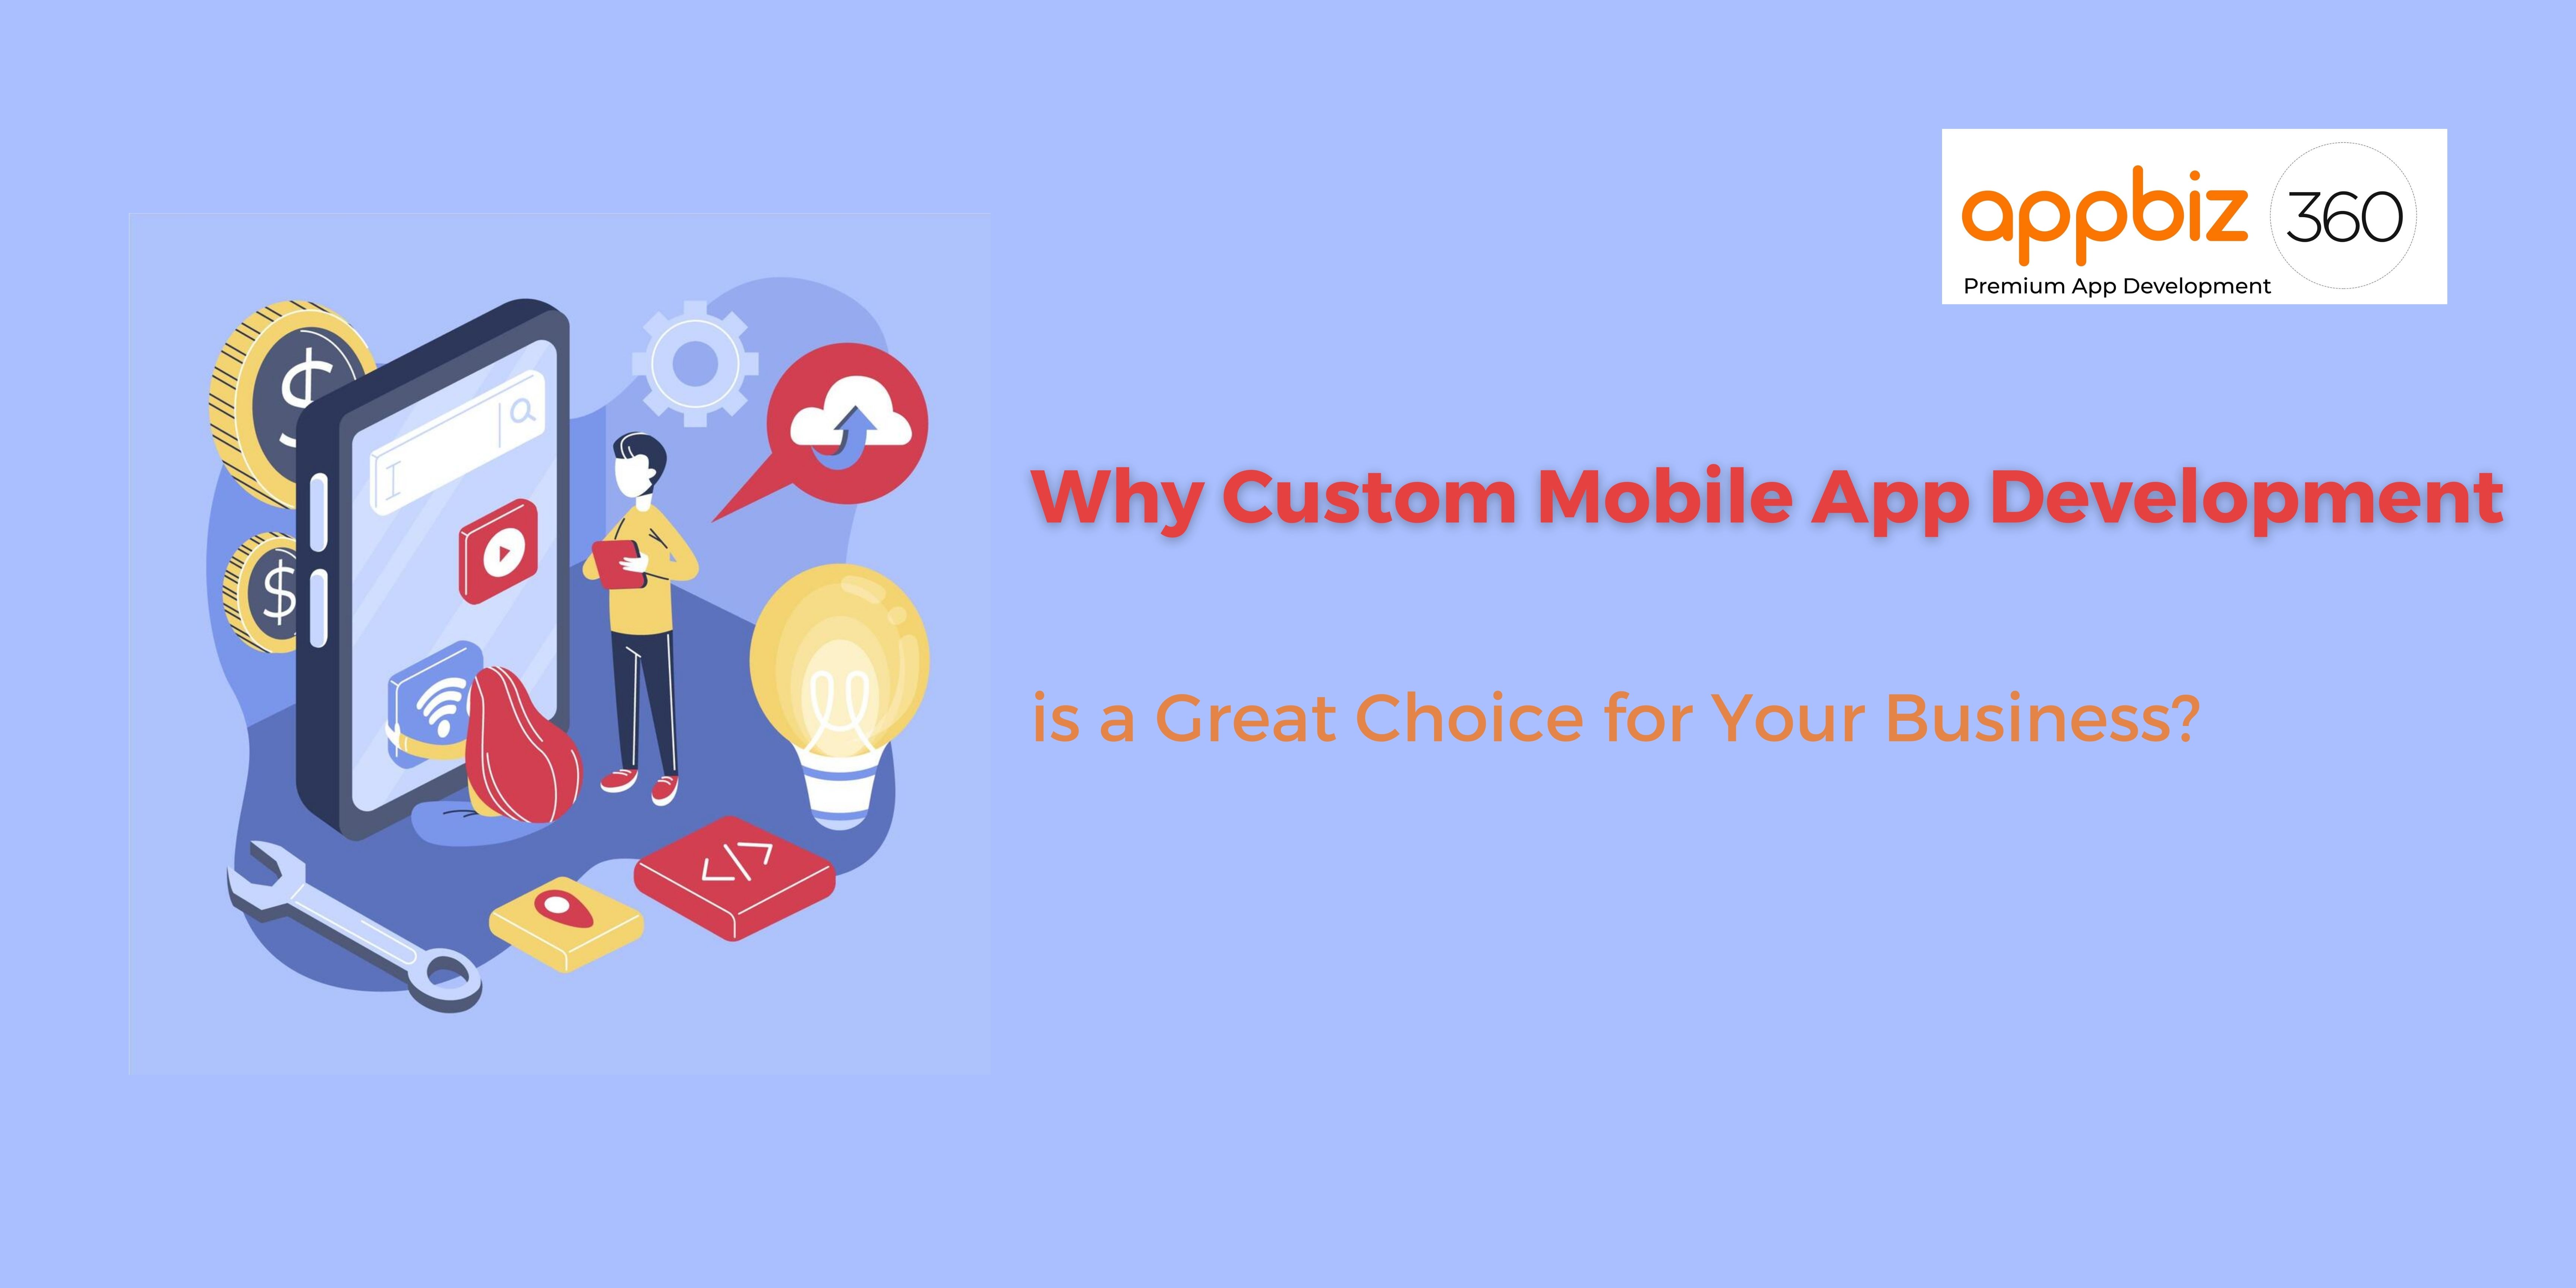 Why Custom Mobile App Development is a Great Choice for Your Business?